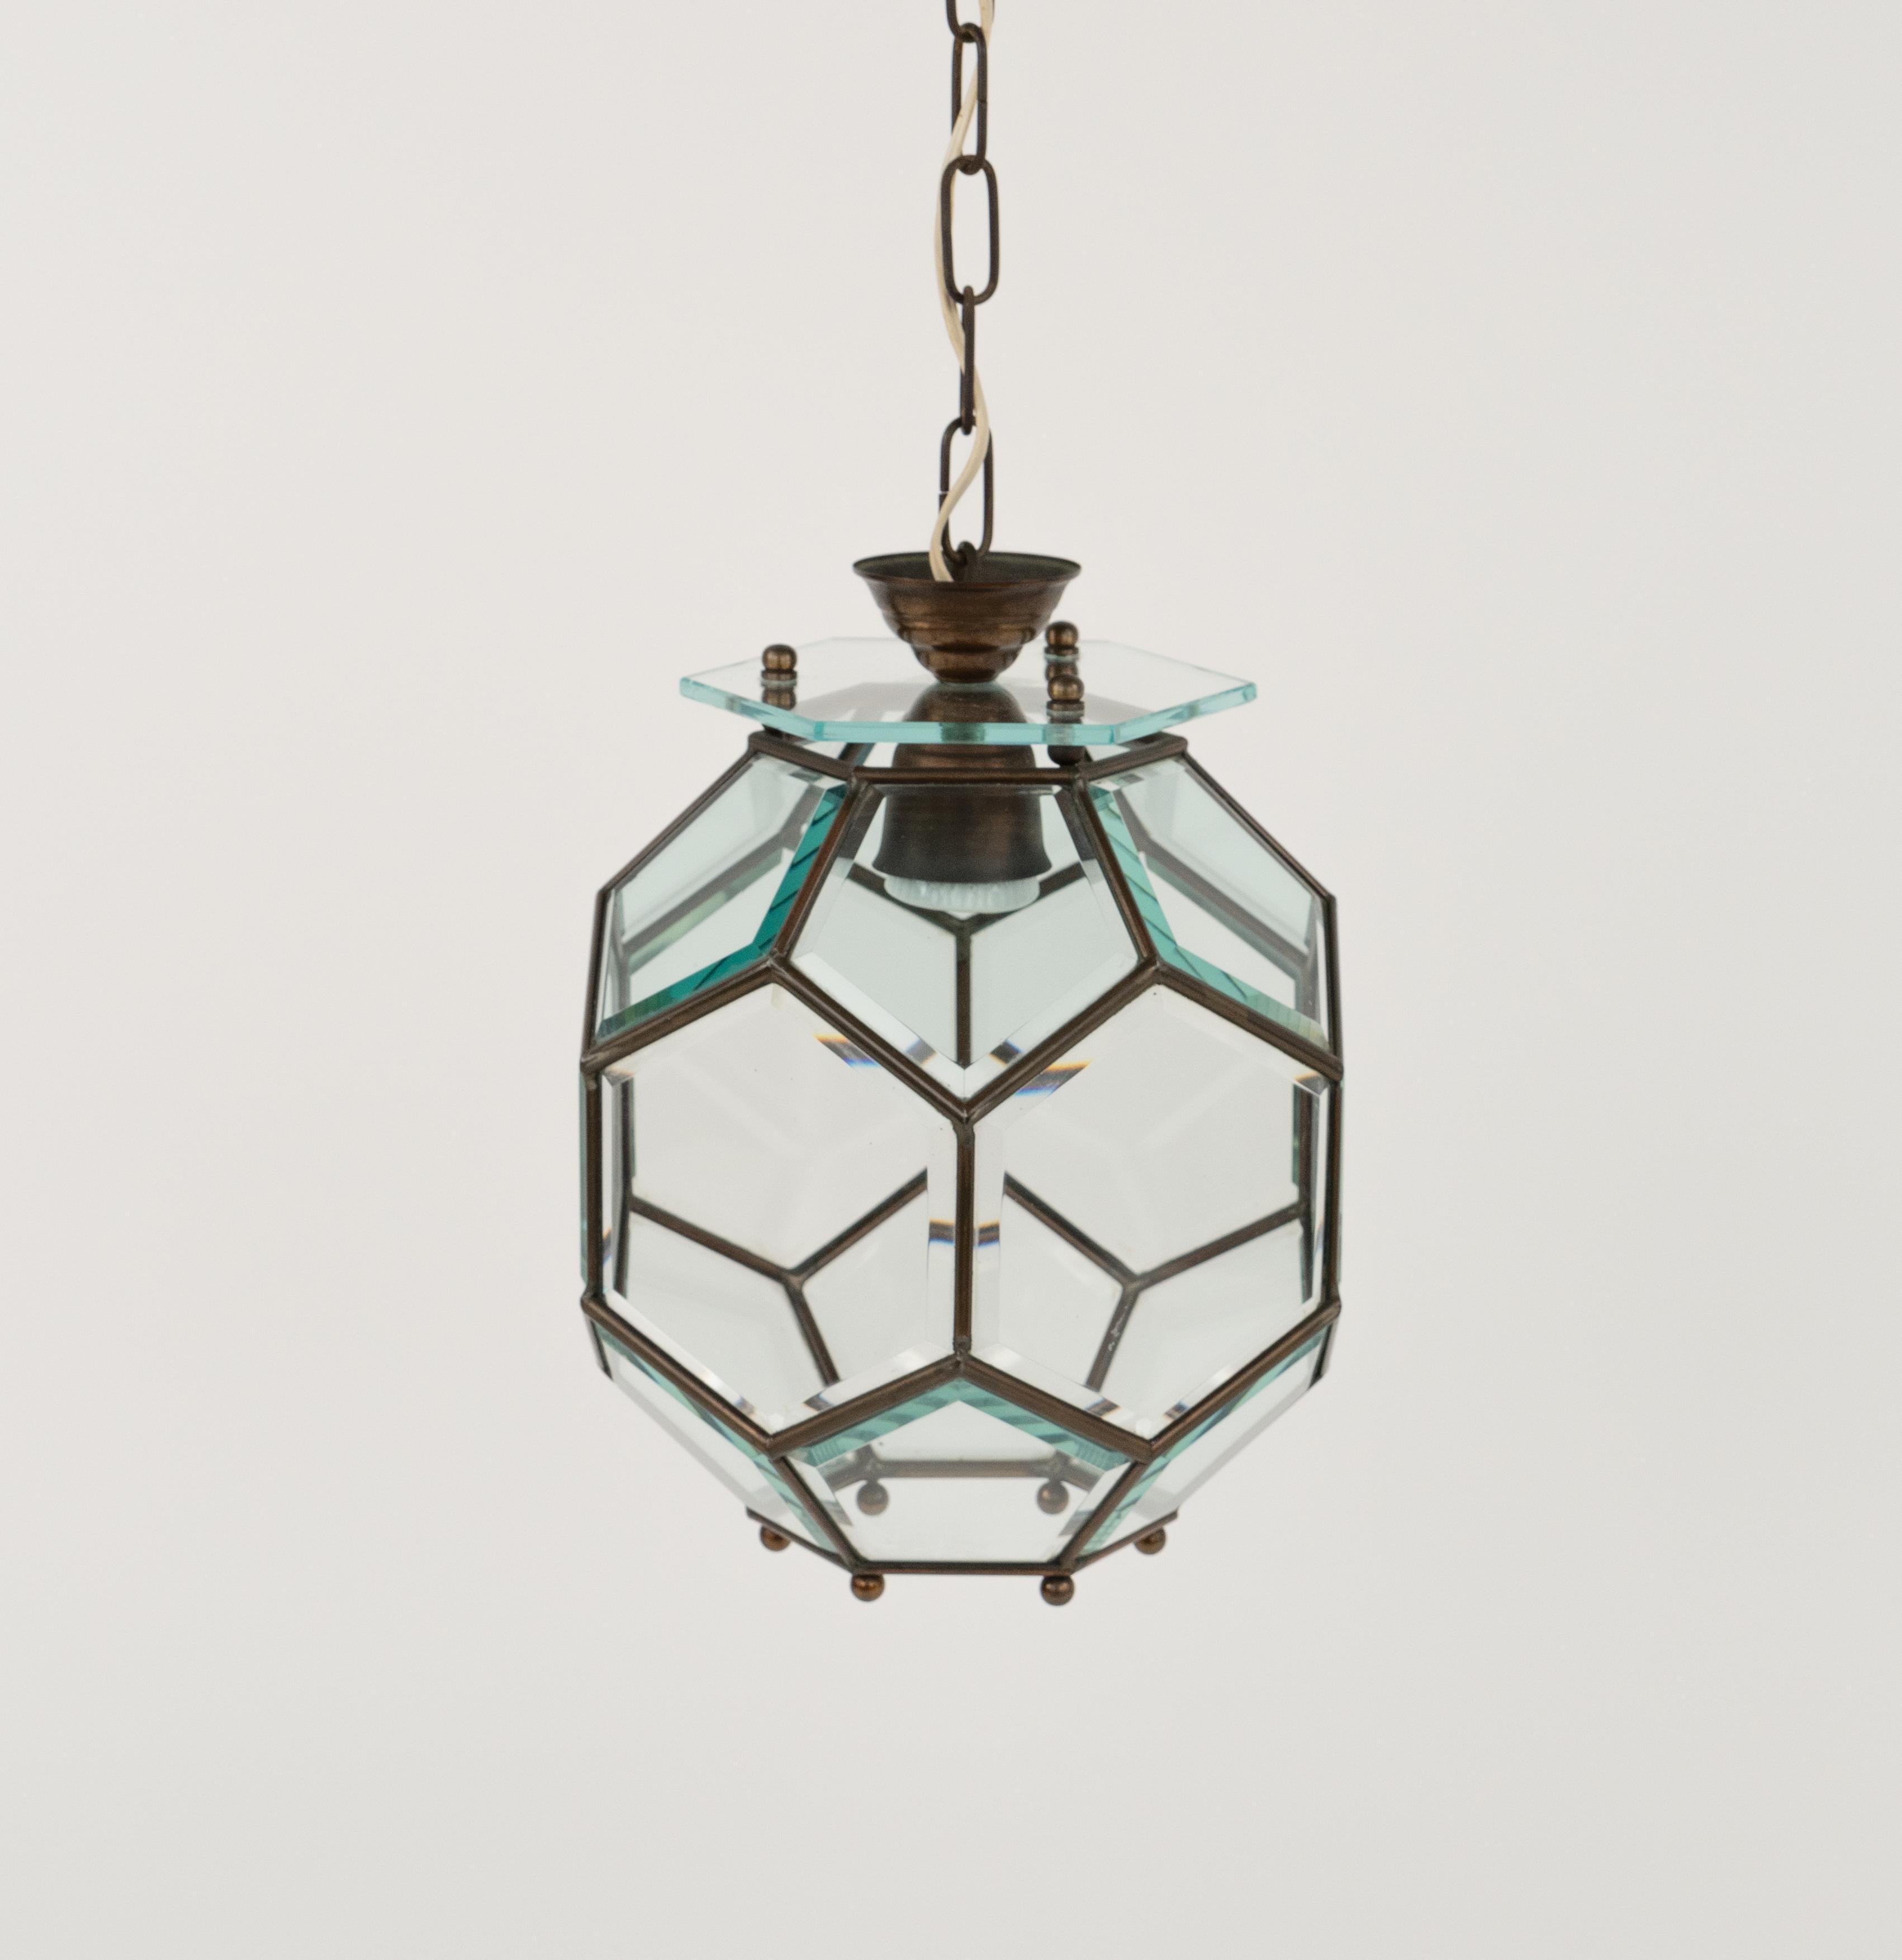 Midcentury Chandelier in Brass and Beveled Glass Adolf Loos Style, Italy 1950s For Sale 3